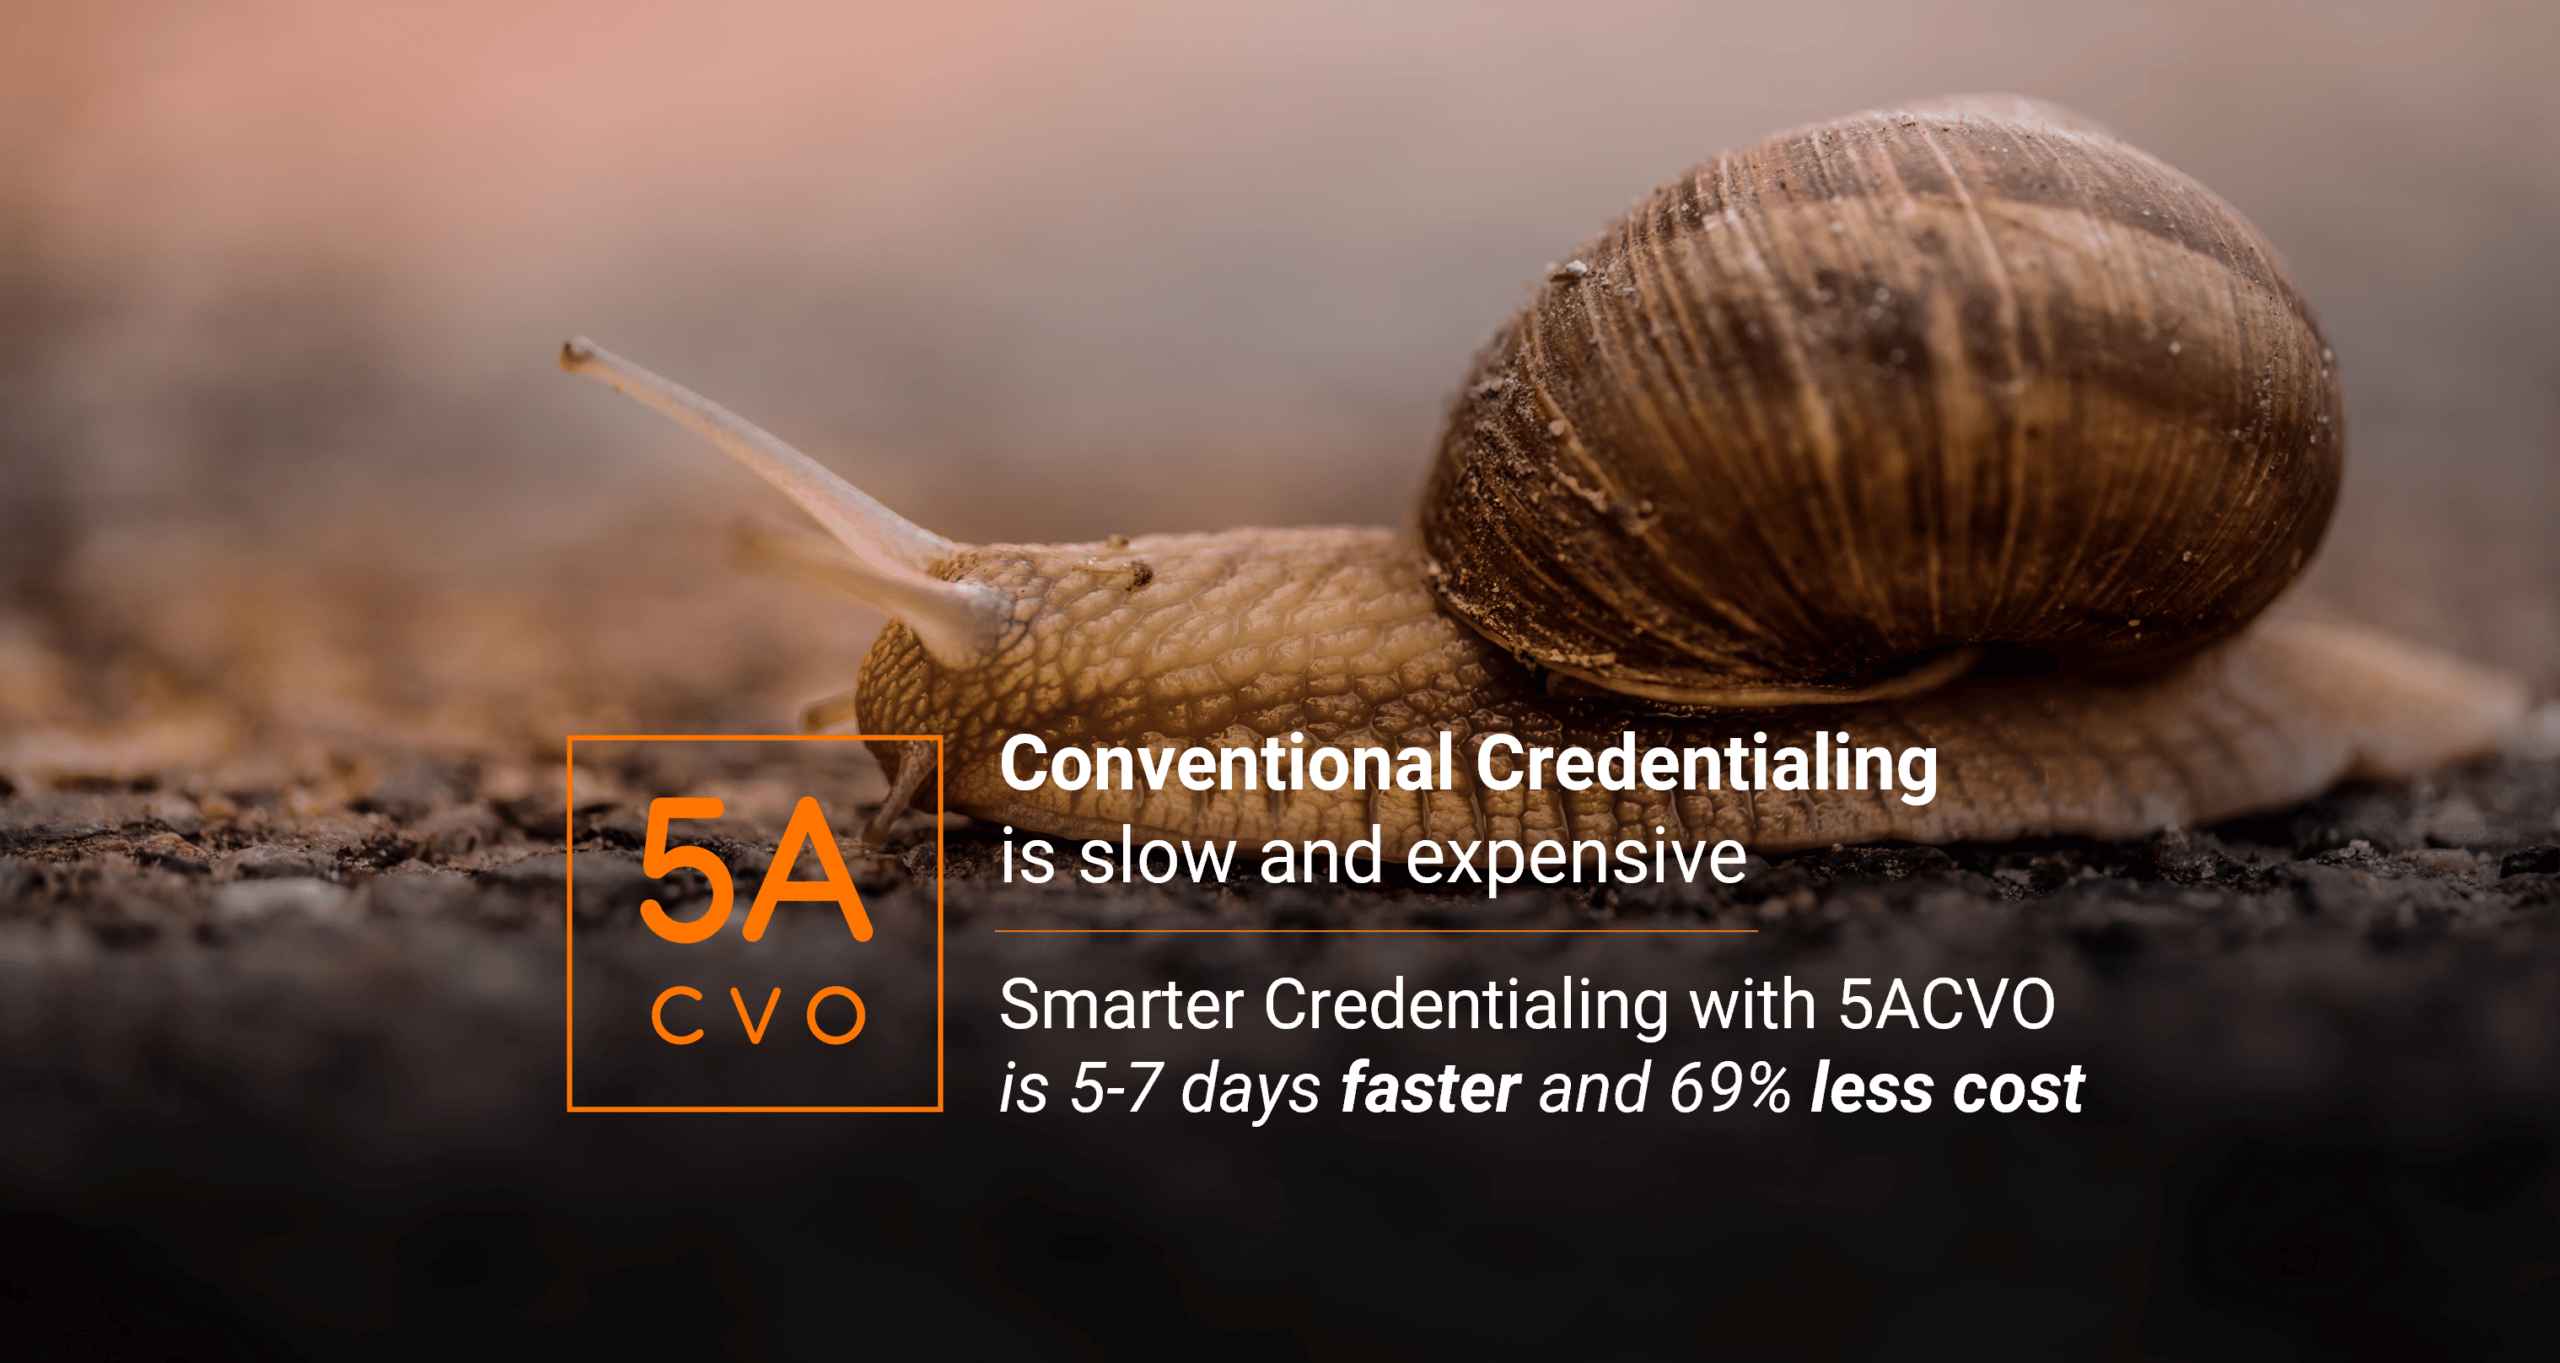 5Acvo Is The Faster Way To Do Credentialing